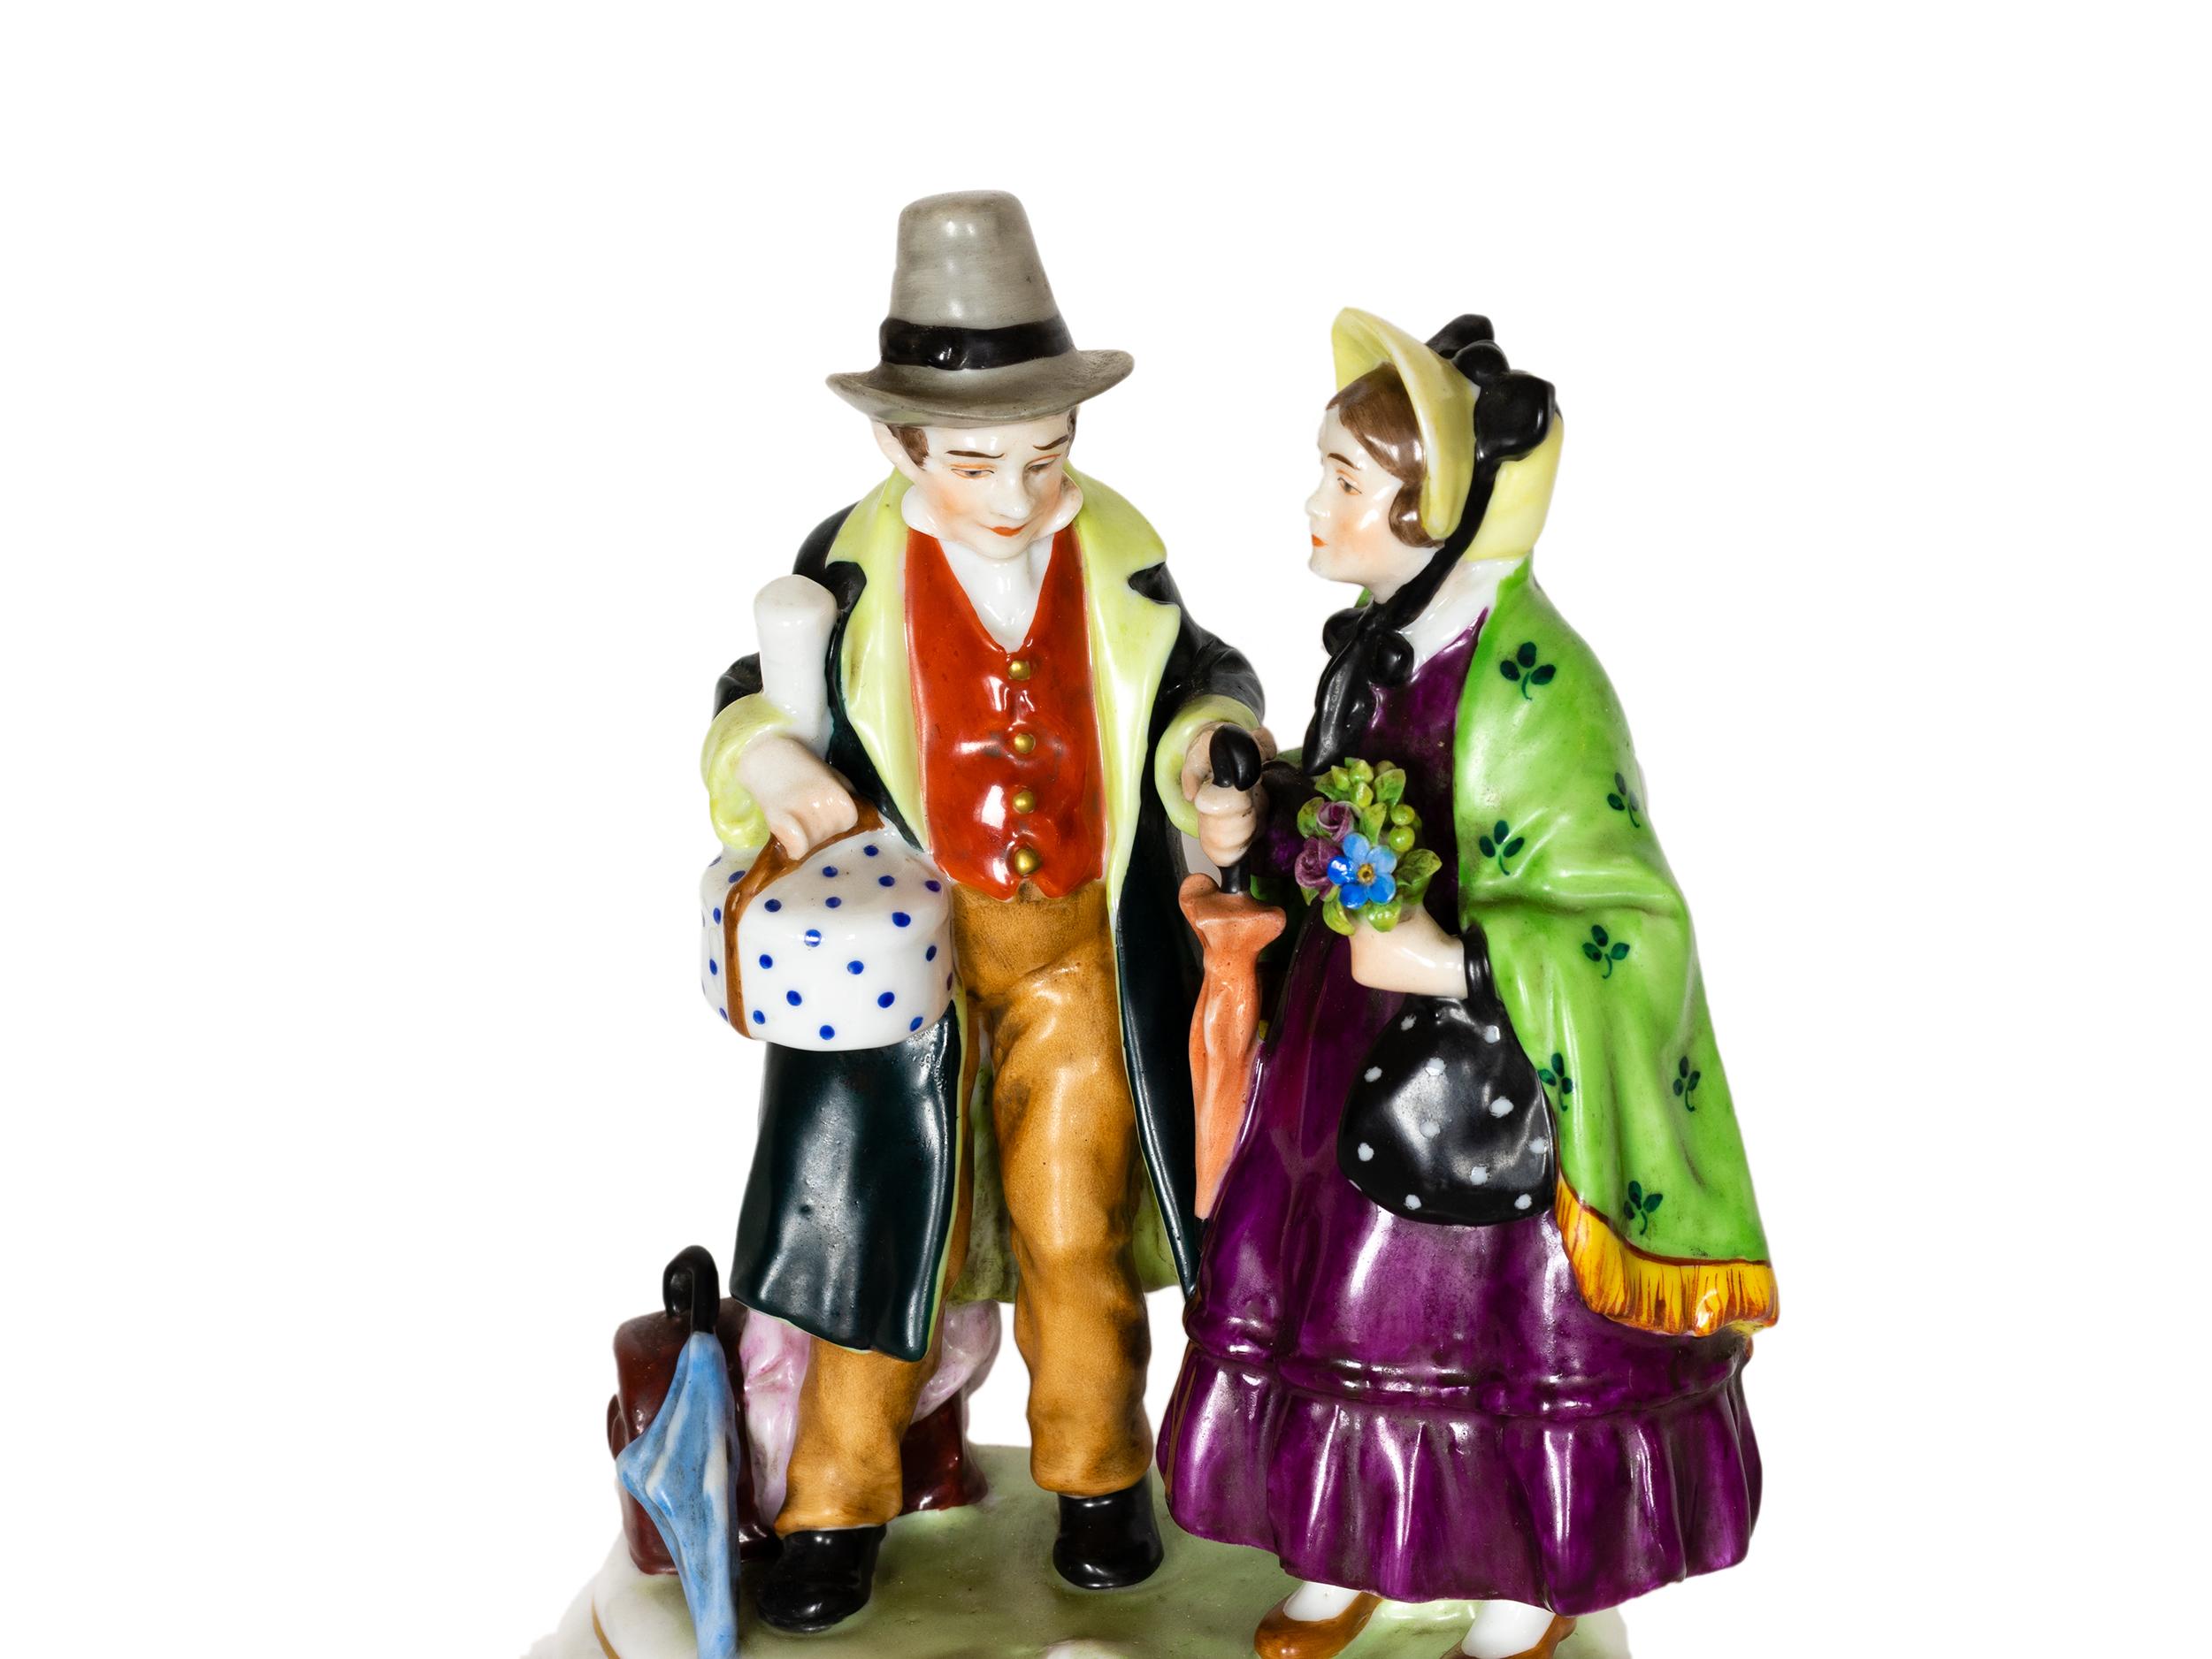 French Late 18th Century traveling couple figurine by Capodimonete 1771 - 1834 For Sale